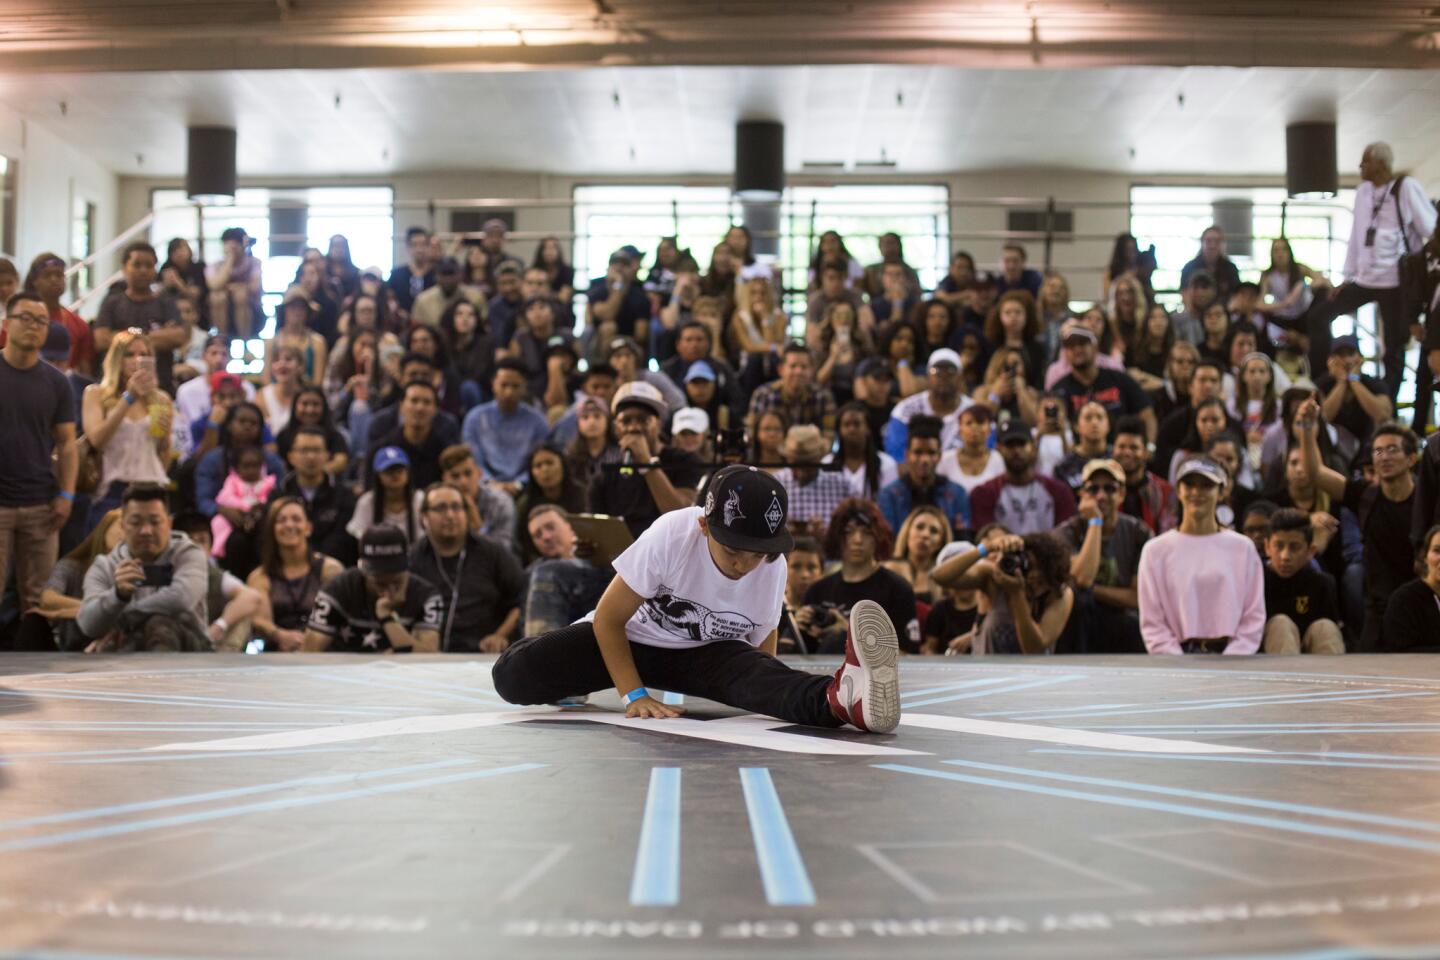 Aidan Serrano, 11, participates in the all styles battle during the World of Dance at the Fairplex in Pomona on April 1.